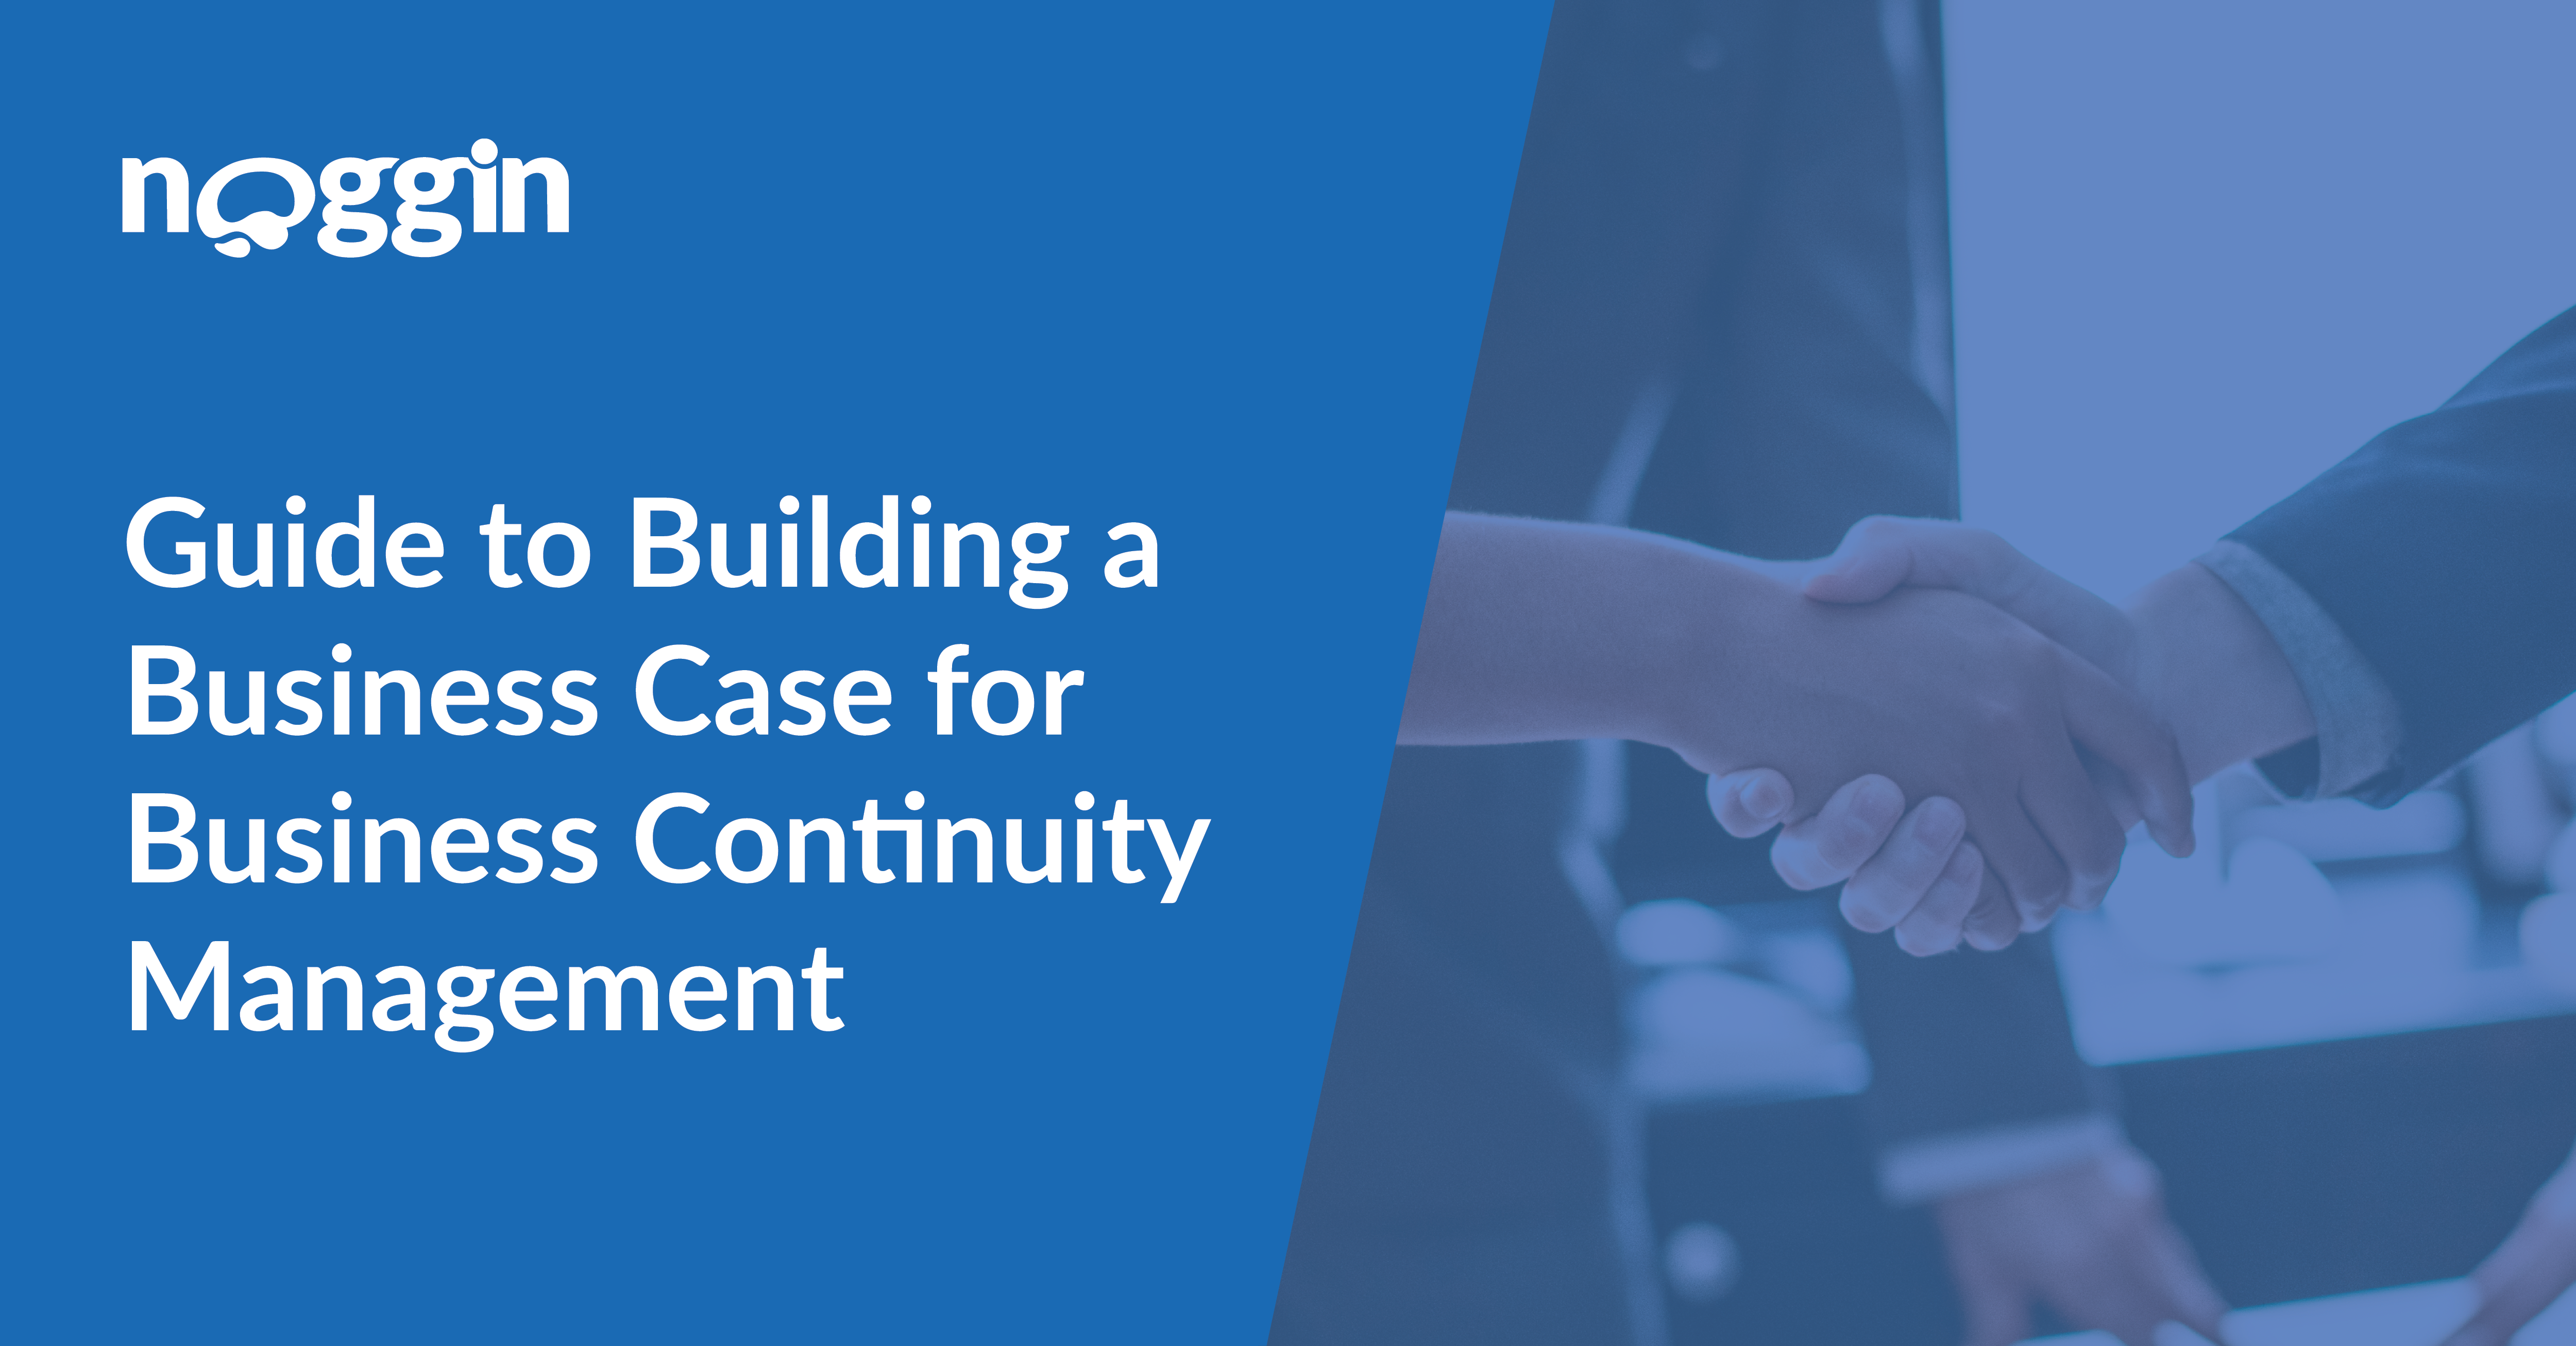 Noggin_BCI_Guide to Building a Business Case for Business Continuity Management.png